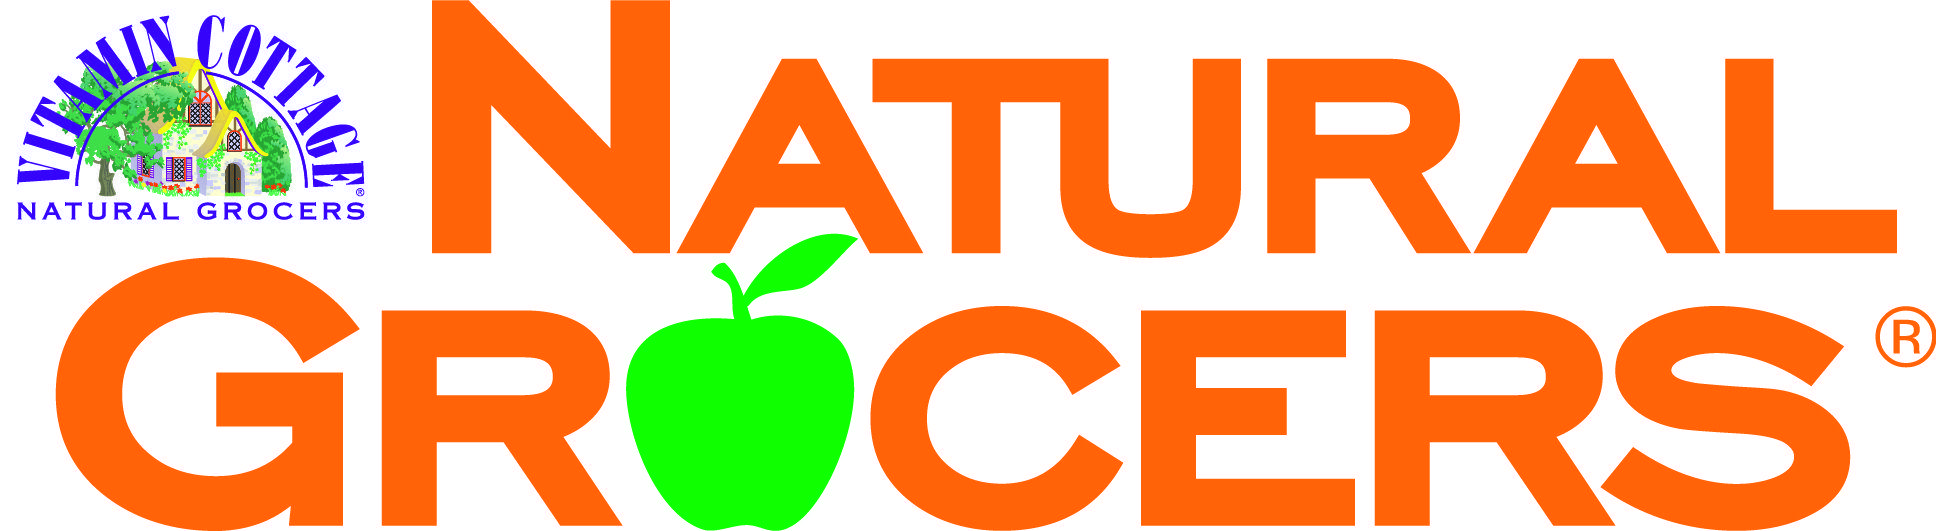 Natural Grocers Logo - Natural Grocers - Columbia Parks and Recreation